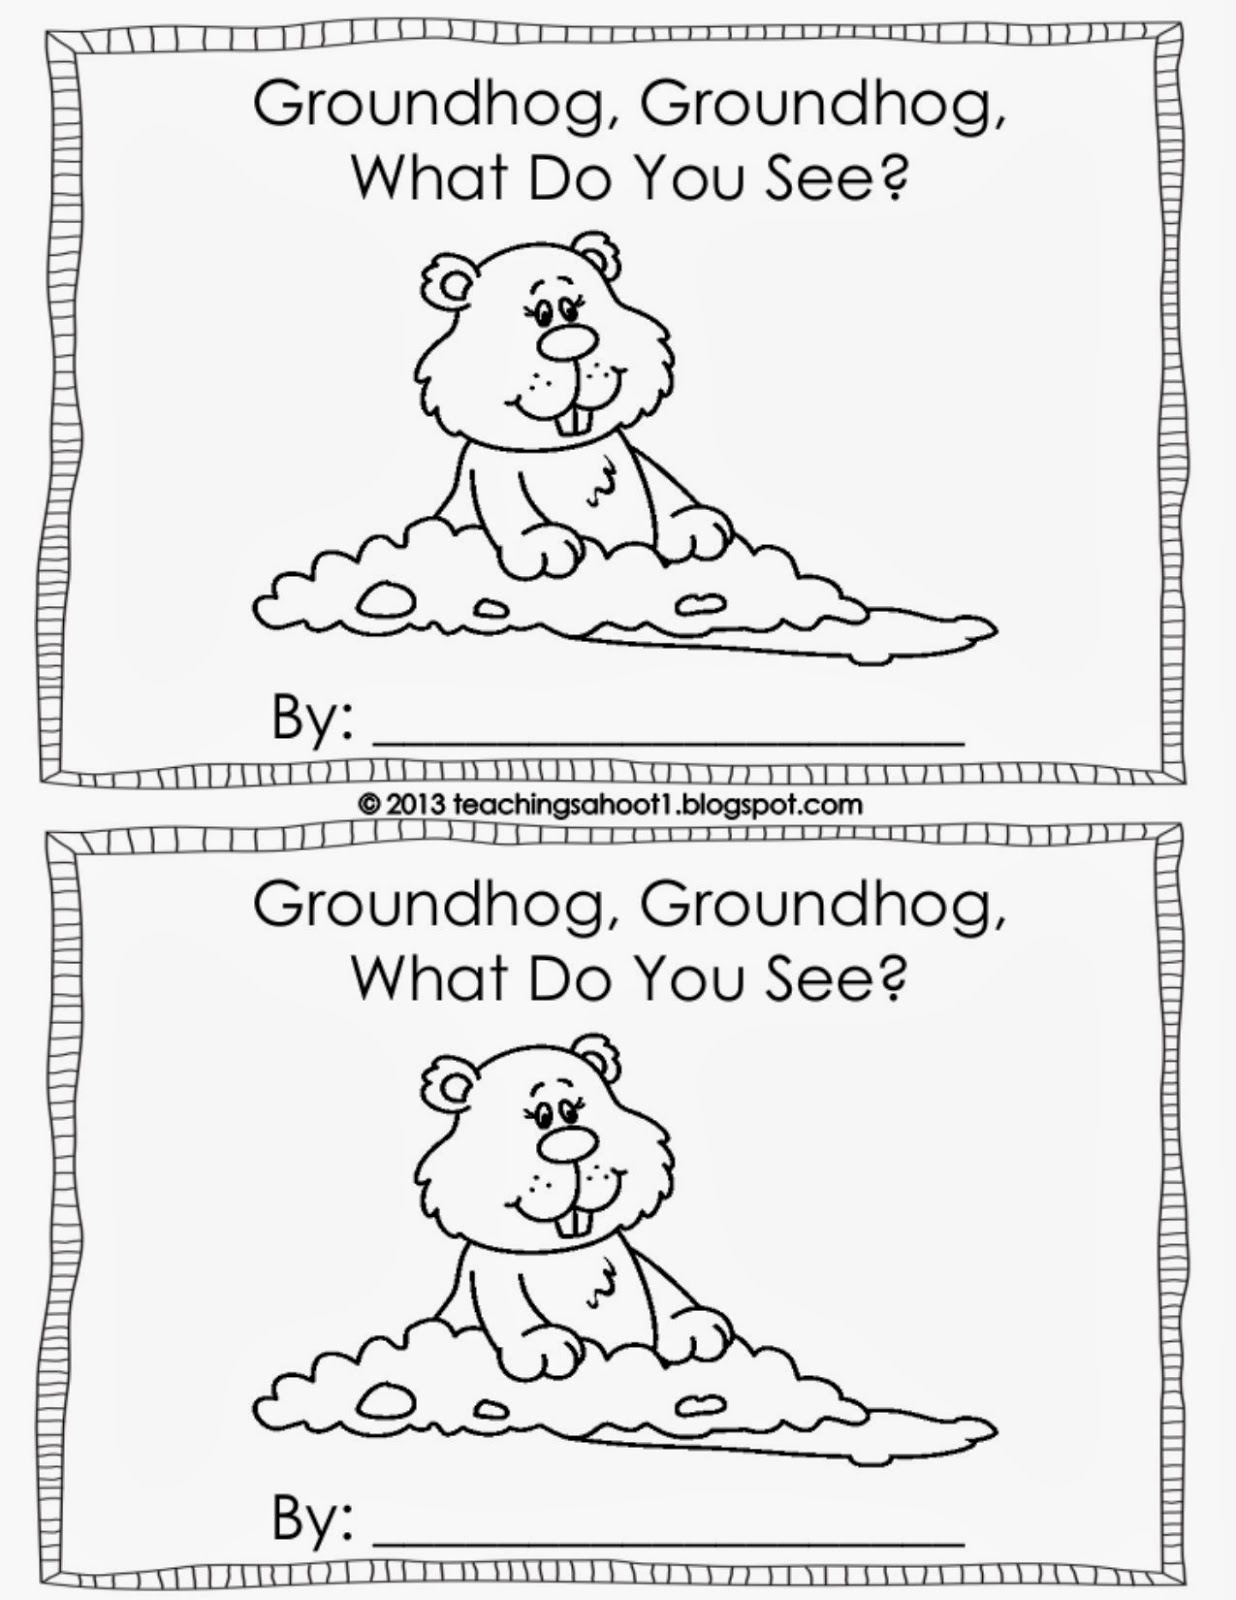 Second Grade Signpost: Tried-It-Tuesday - Groundhog Day! {Craft Freebie} - Free Printable Groundhog Day Booklet